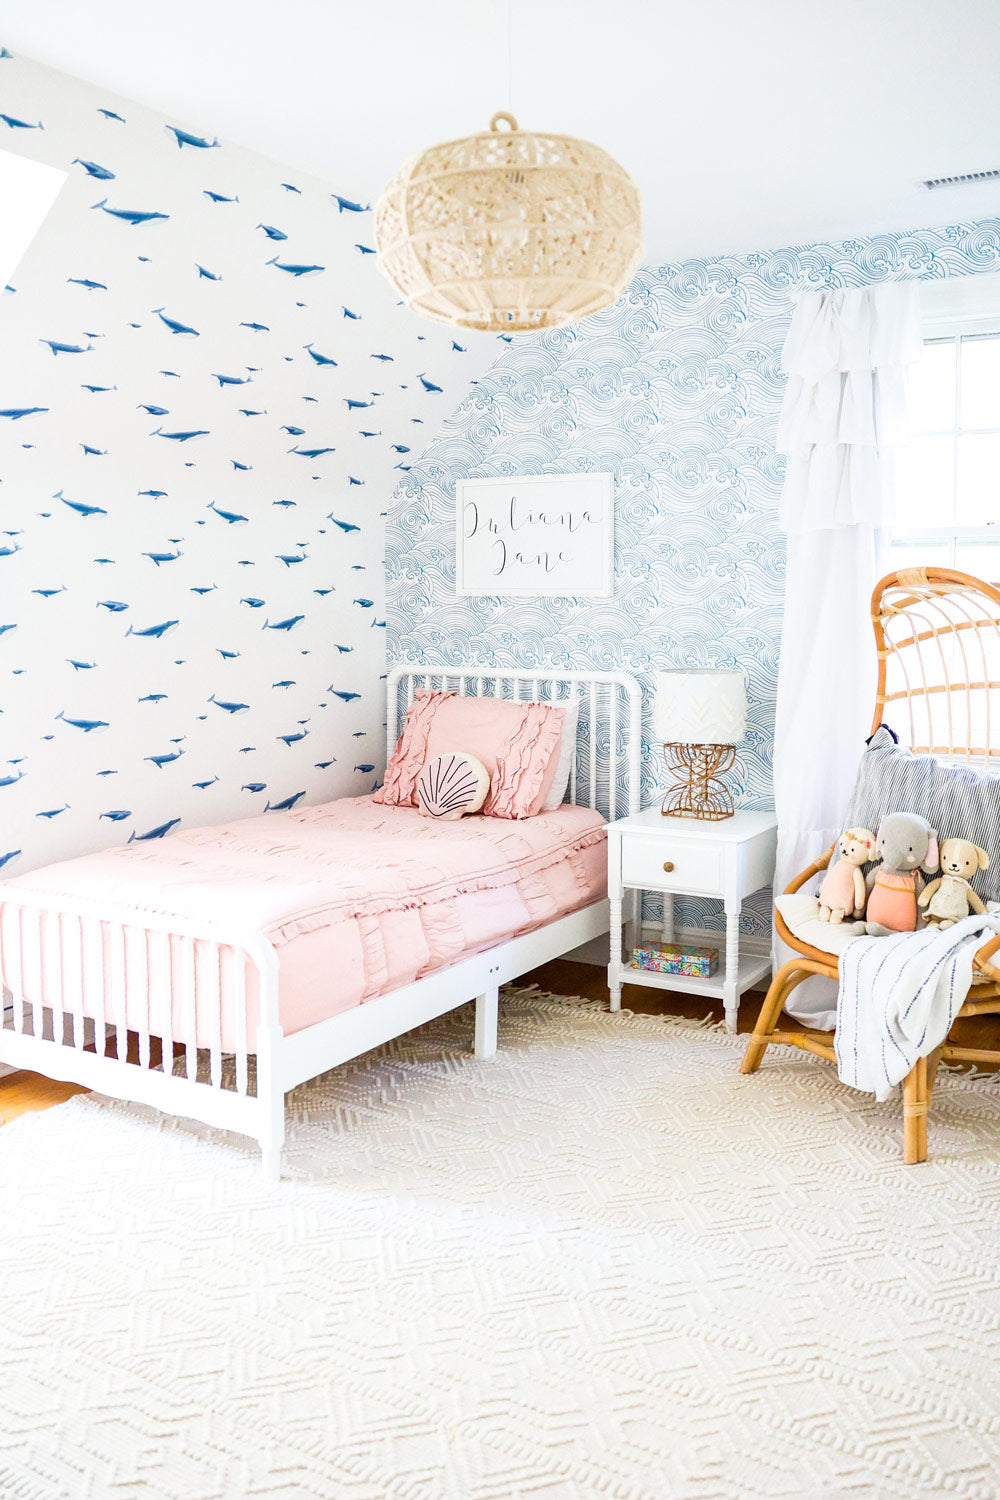 Ocean themed girls room DIY featuring removable wallpaper designs